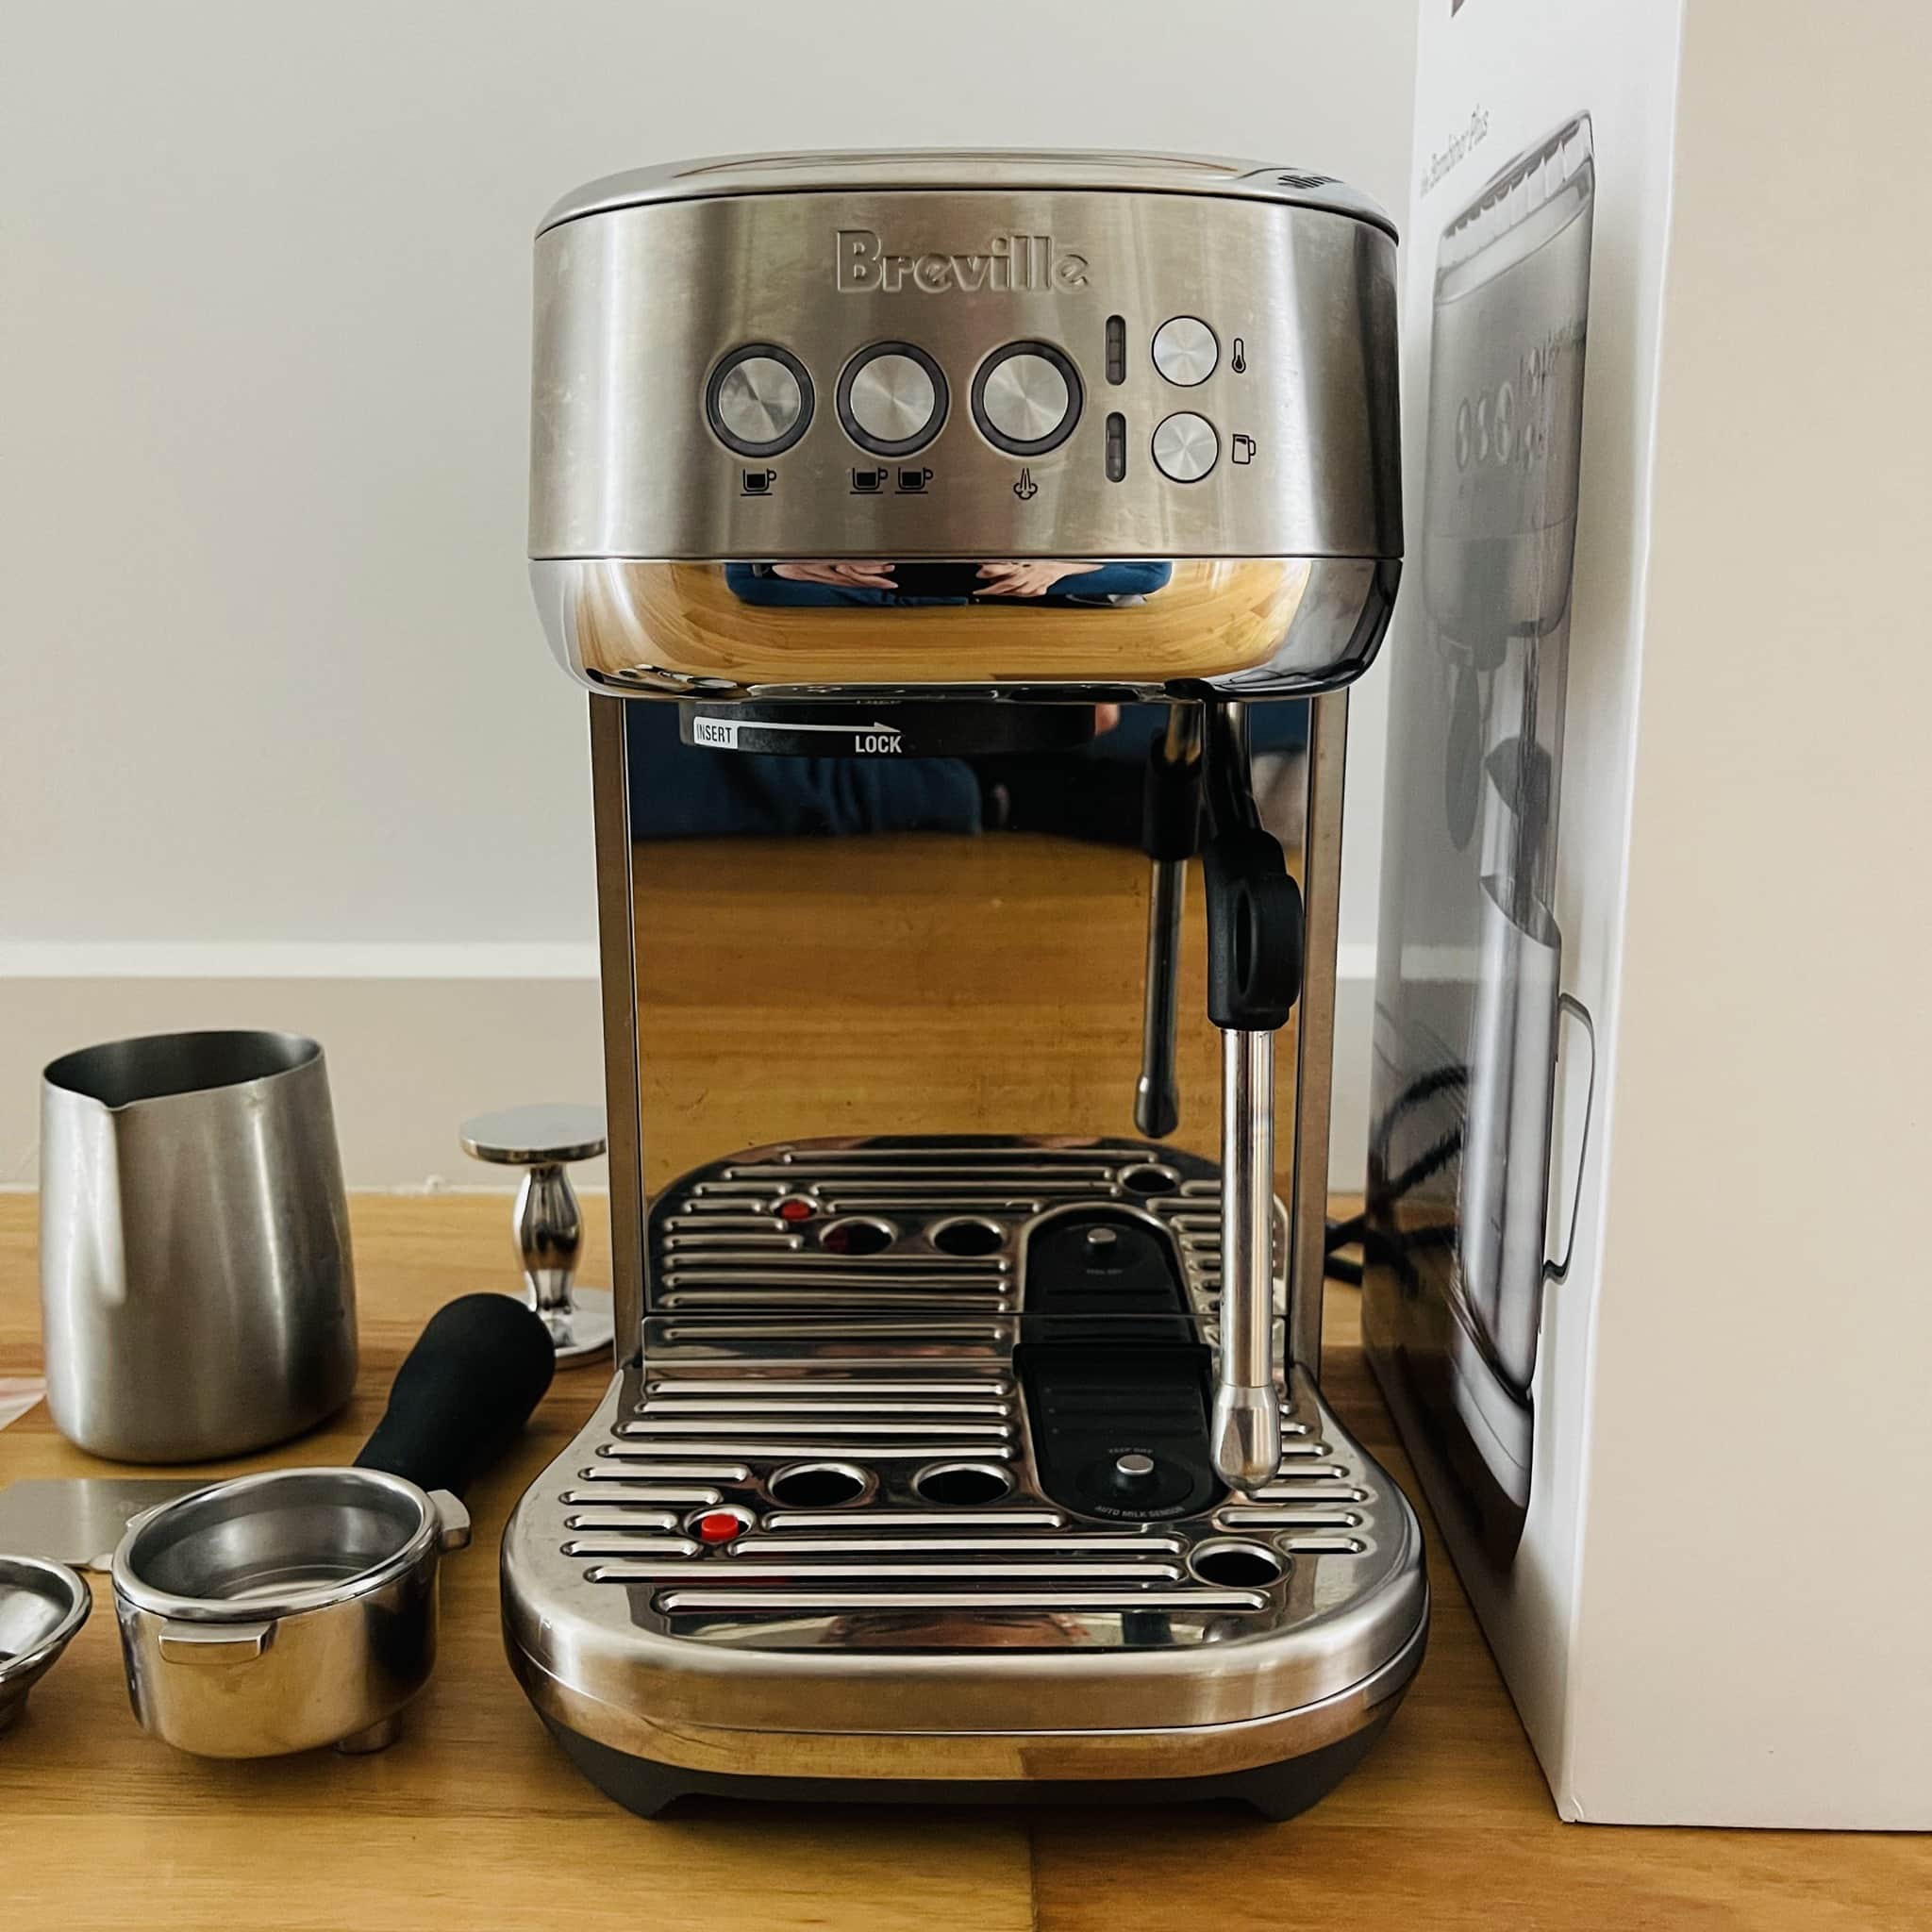 Breville Bambino has a simple set of buttons